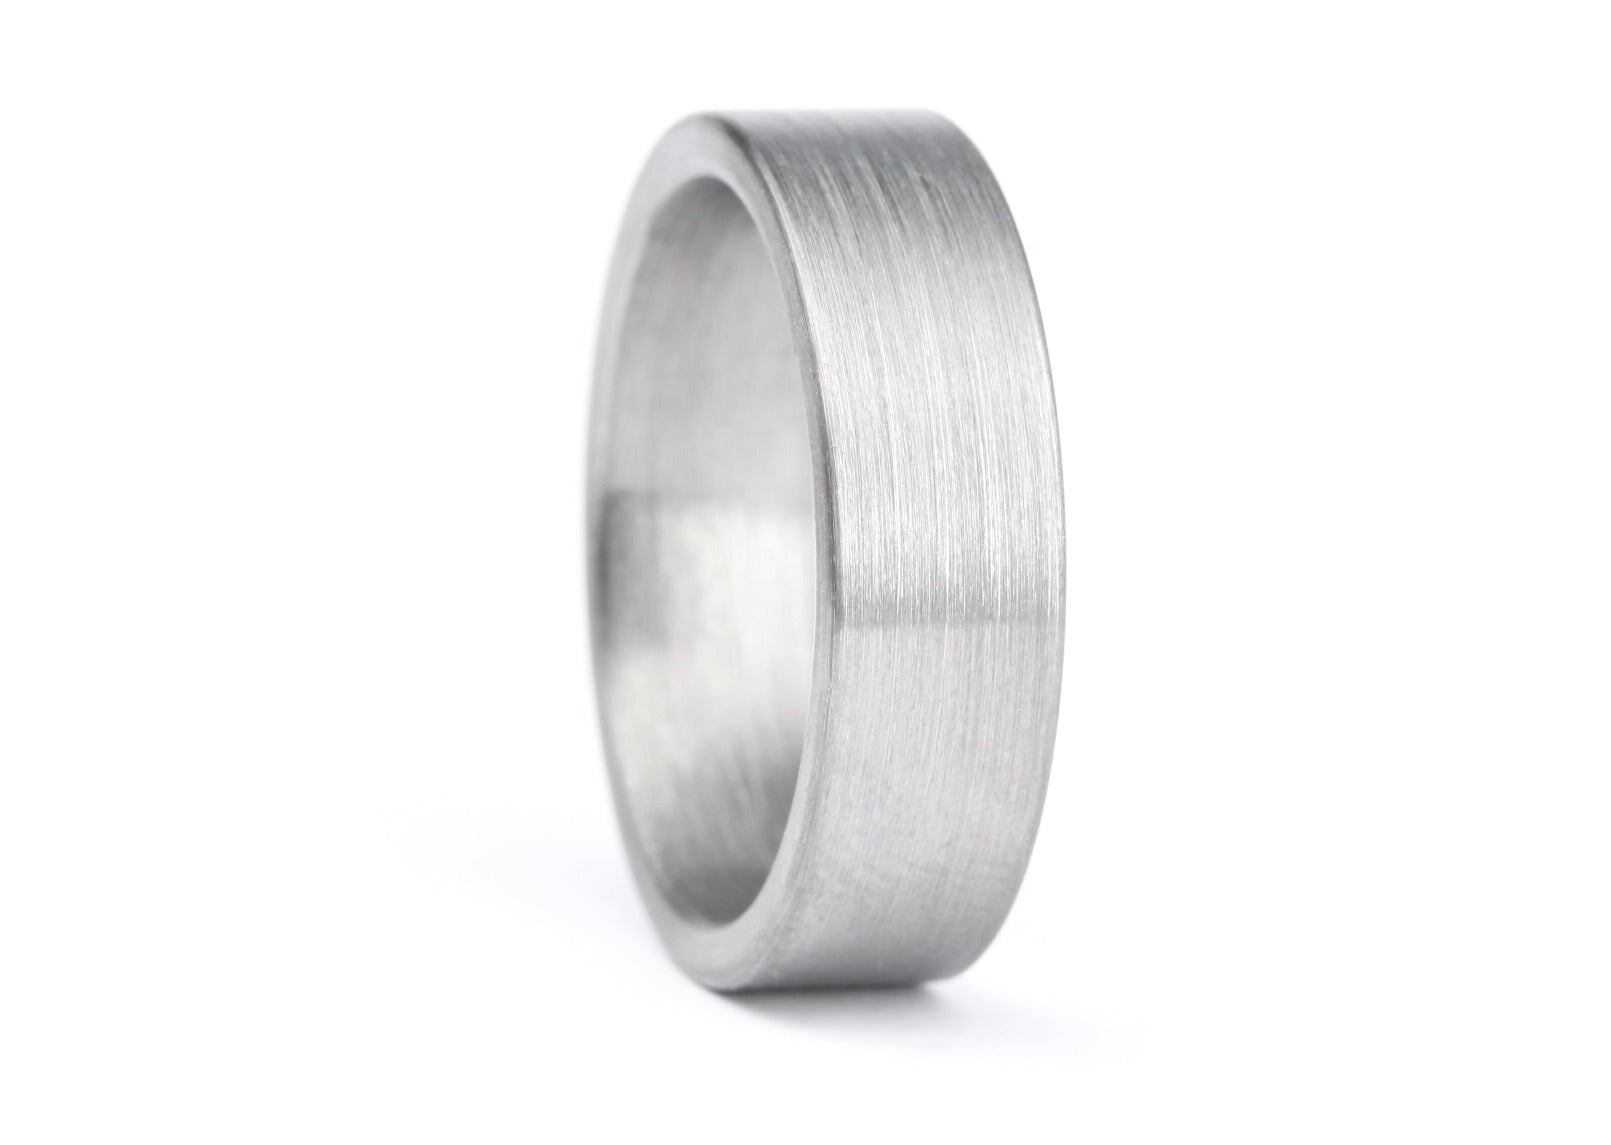 The Zuna Brushed Tungsten Ring Rings 